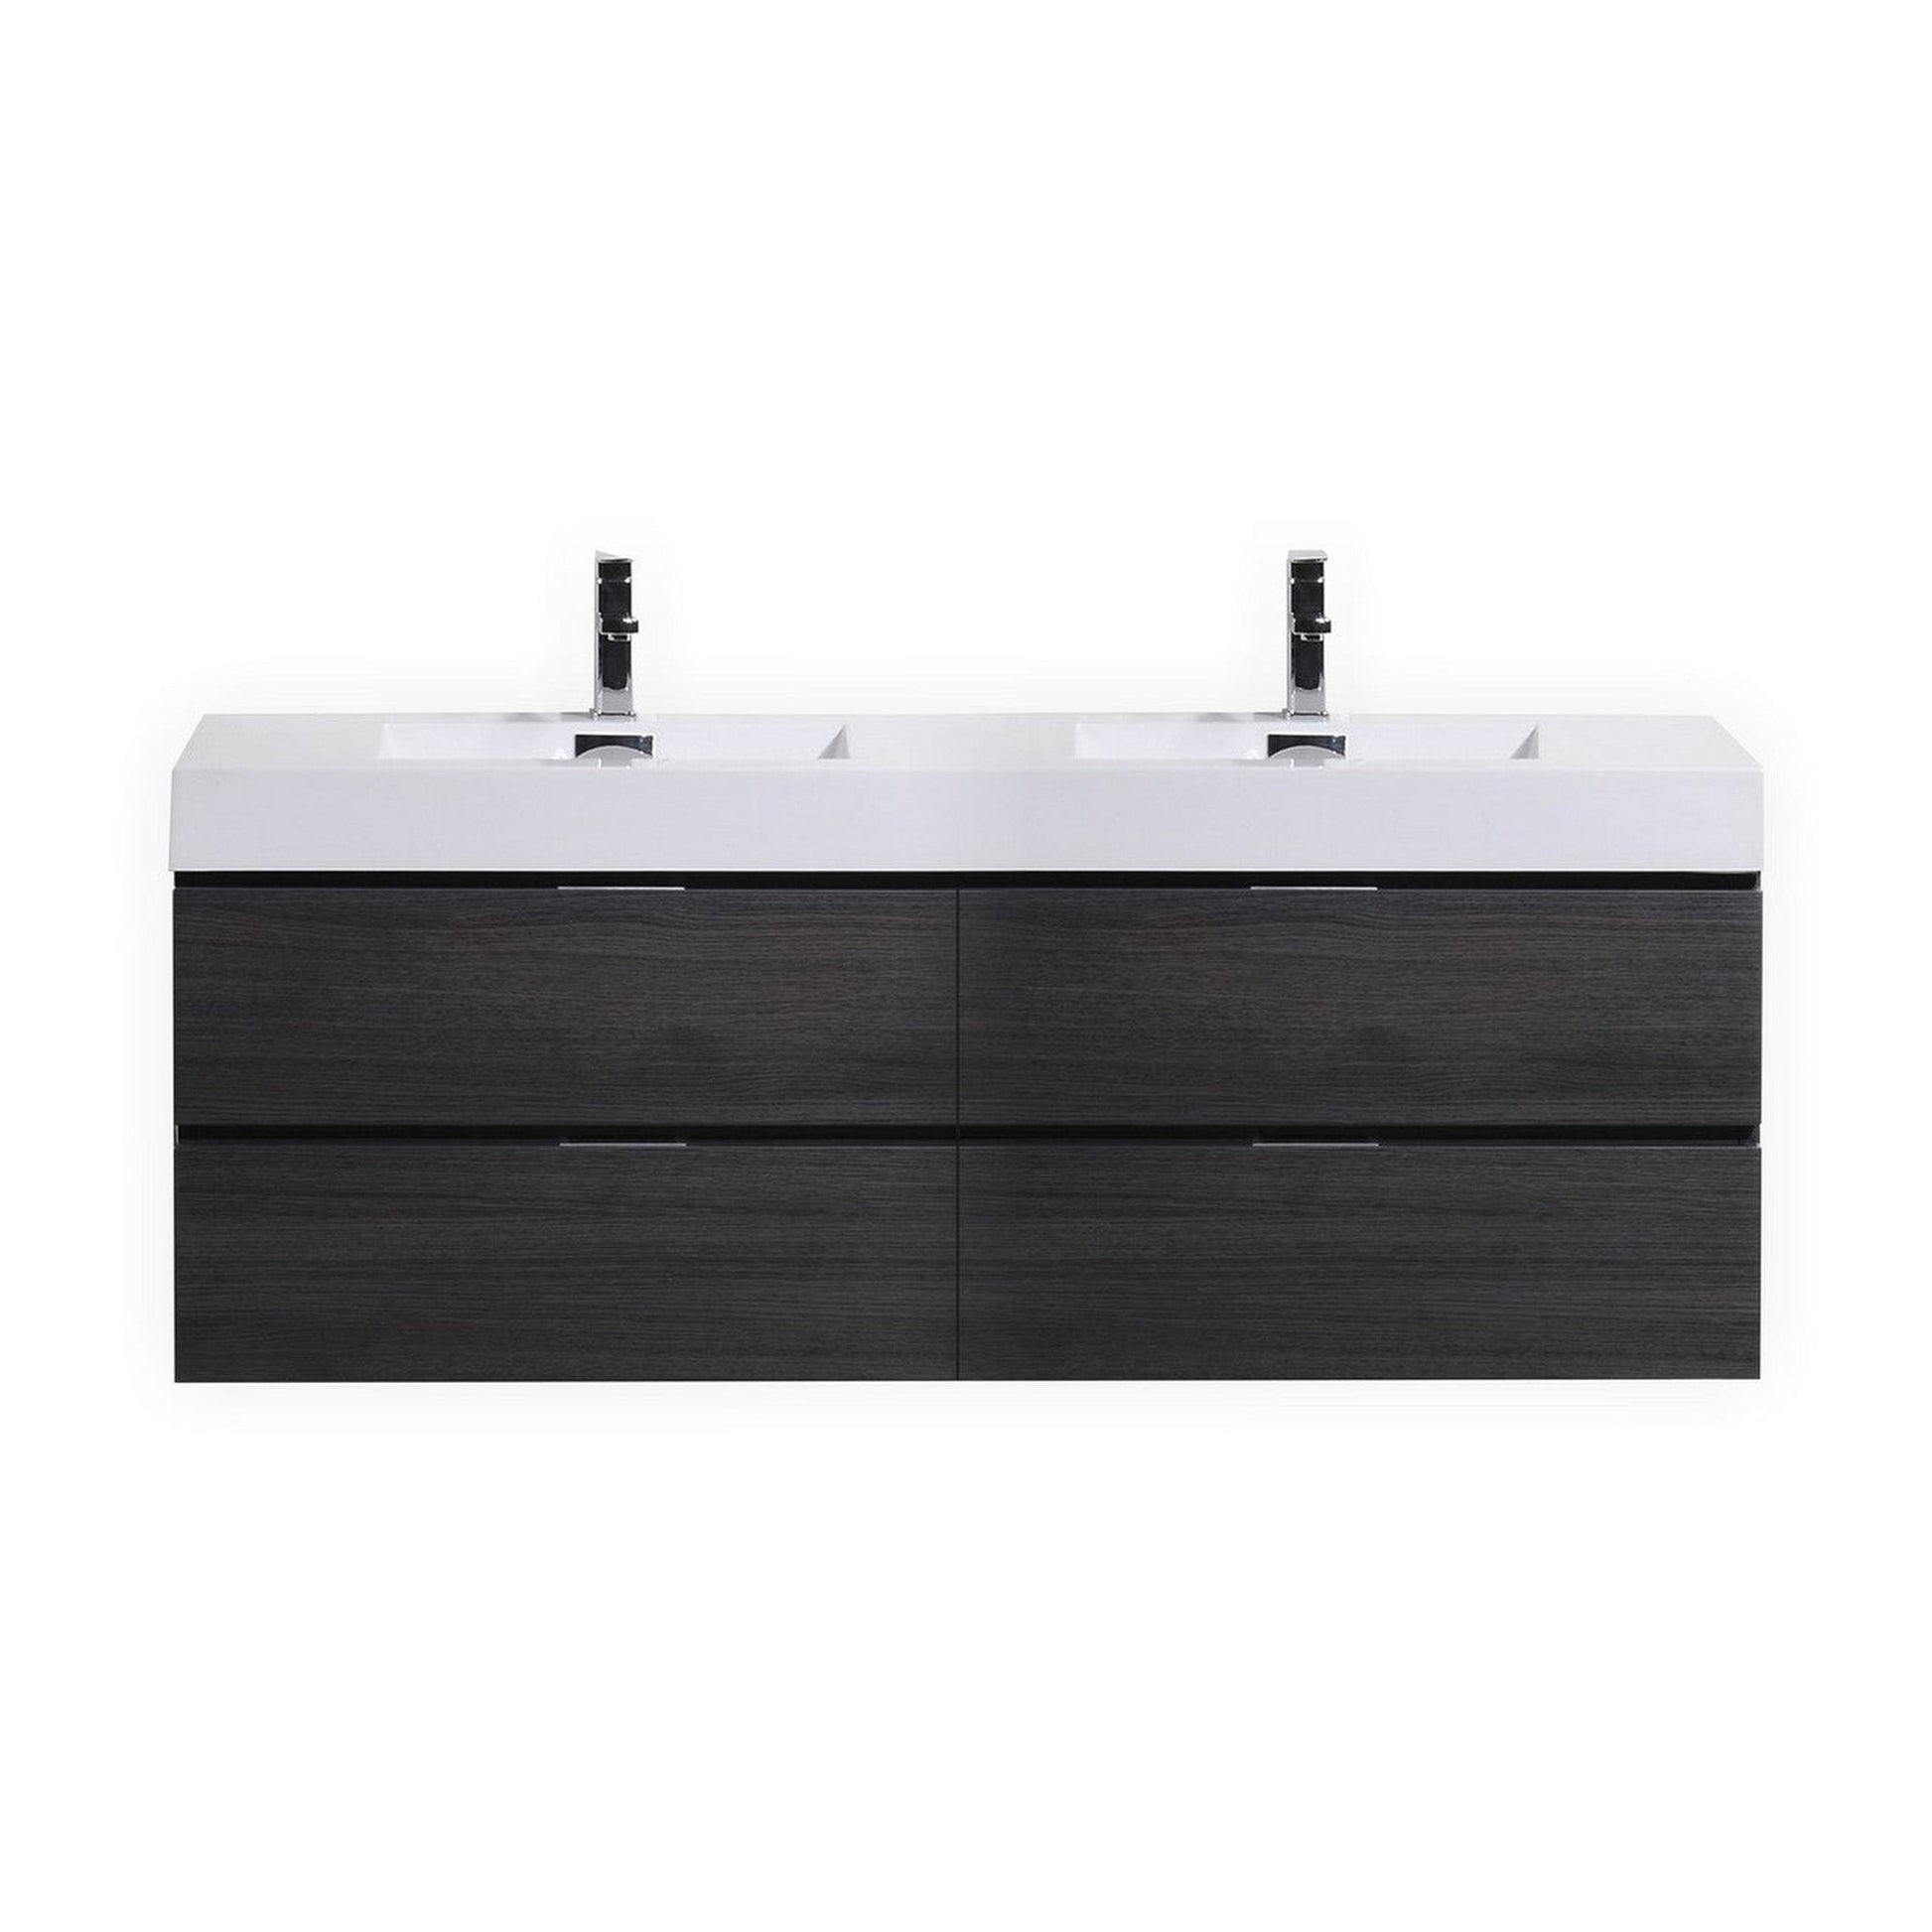 KubeBath Bliss 72" Gray Oak Wall-Mounted Modern Bathroom Vanity With Double Integrated Acrylic Sink With Overflow and 22" Gray Oak Framed Two Mirrors With Shelf